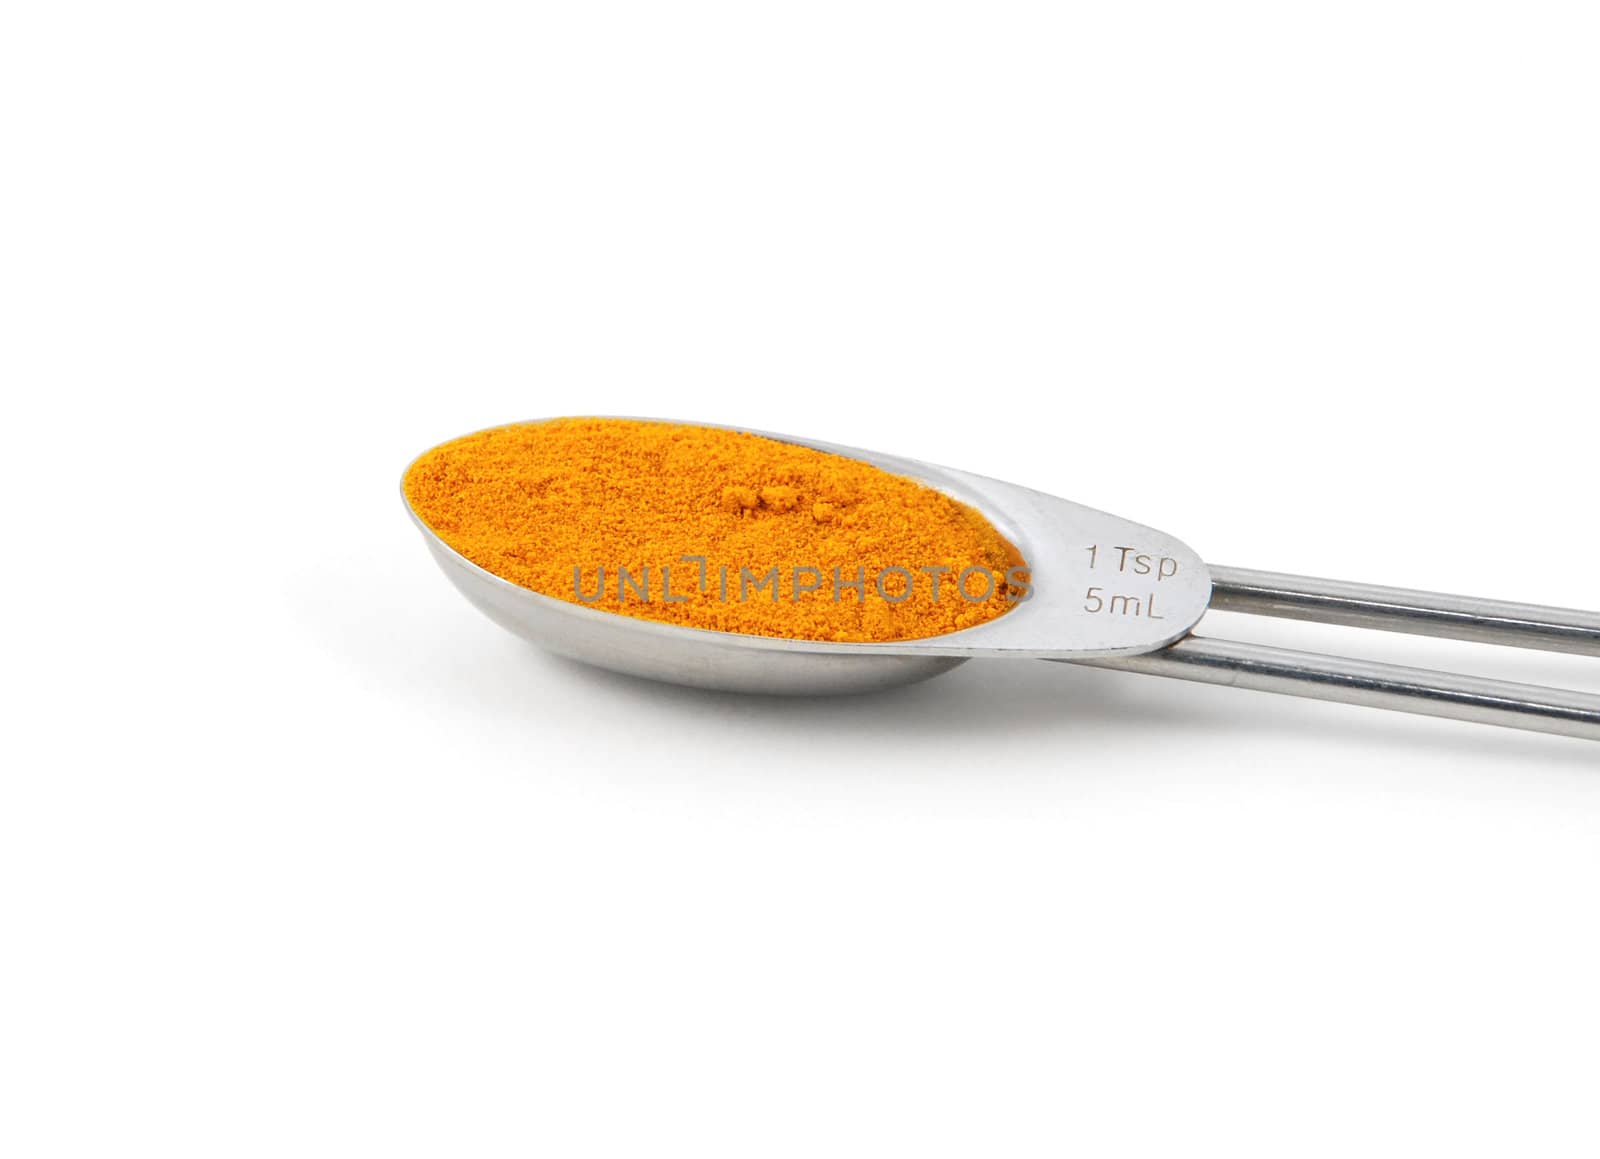 Turmeric measured in a metal teaspoon, isolated on a white background